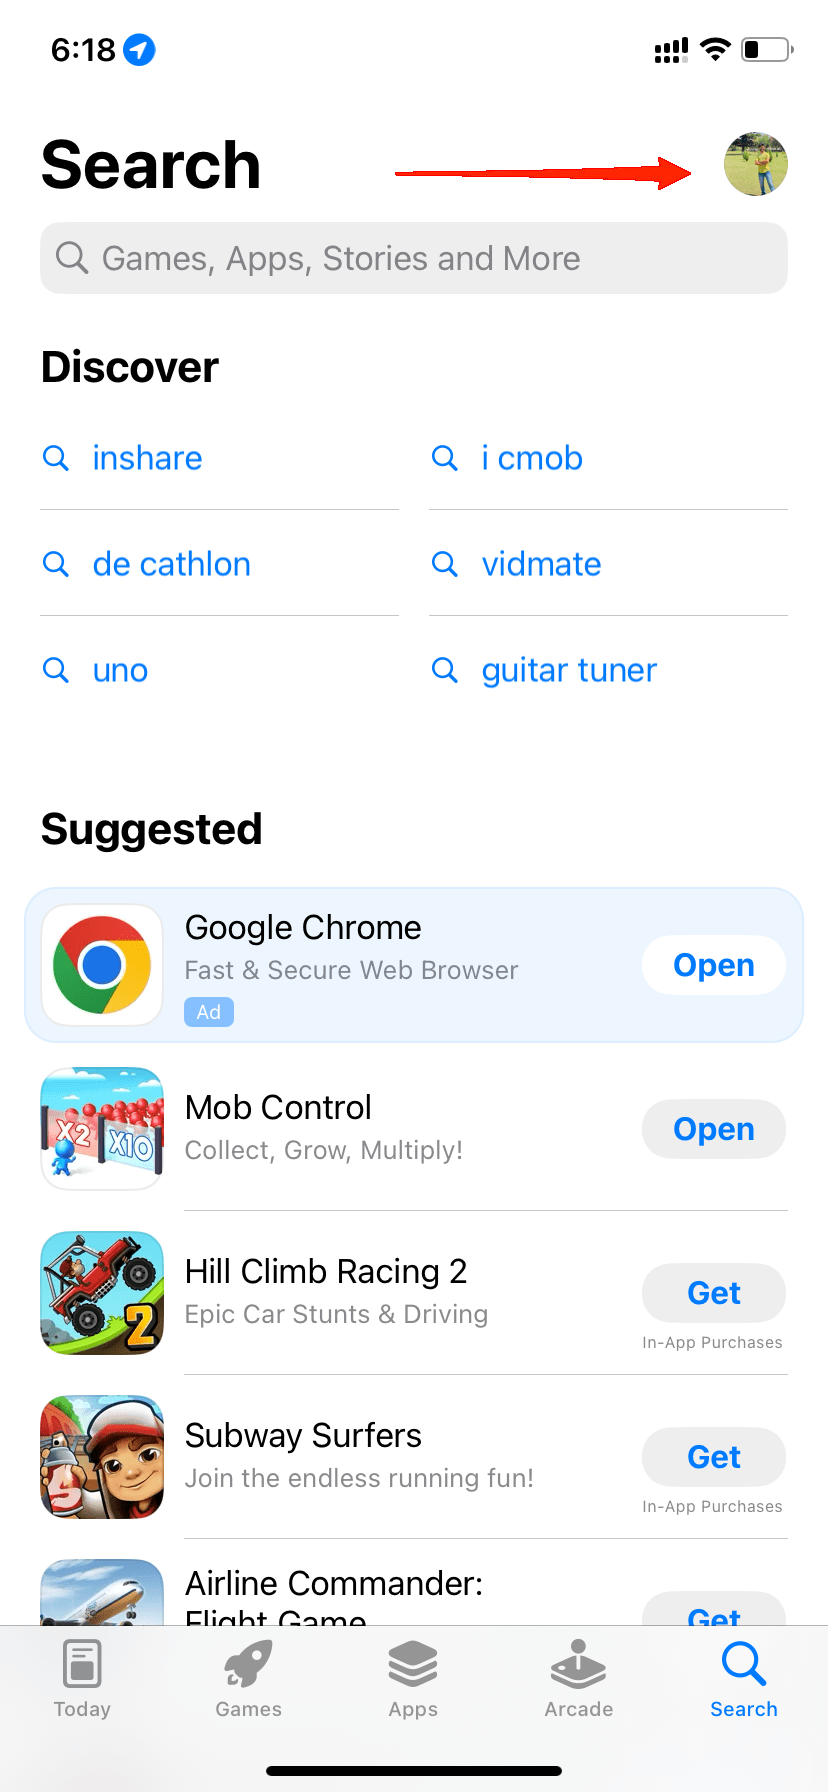 Open the App Store on your iPhone and navigate to the profile icon in the top right corner of the screen